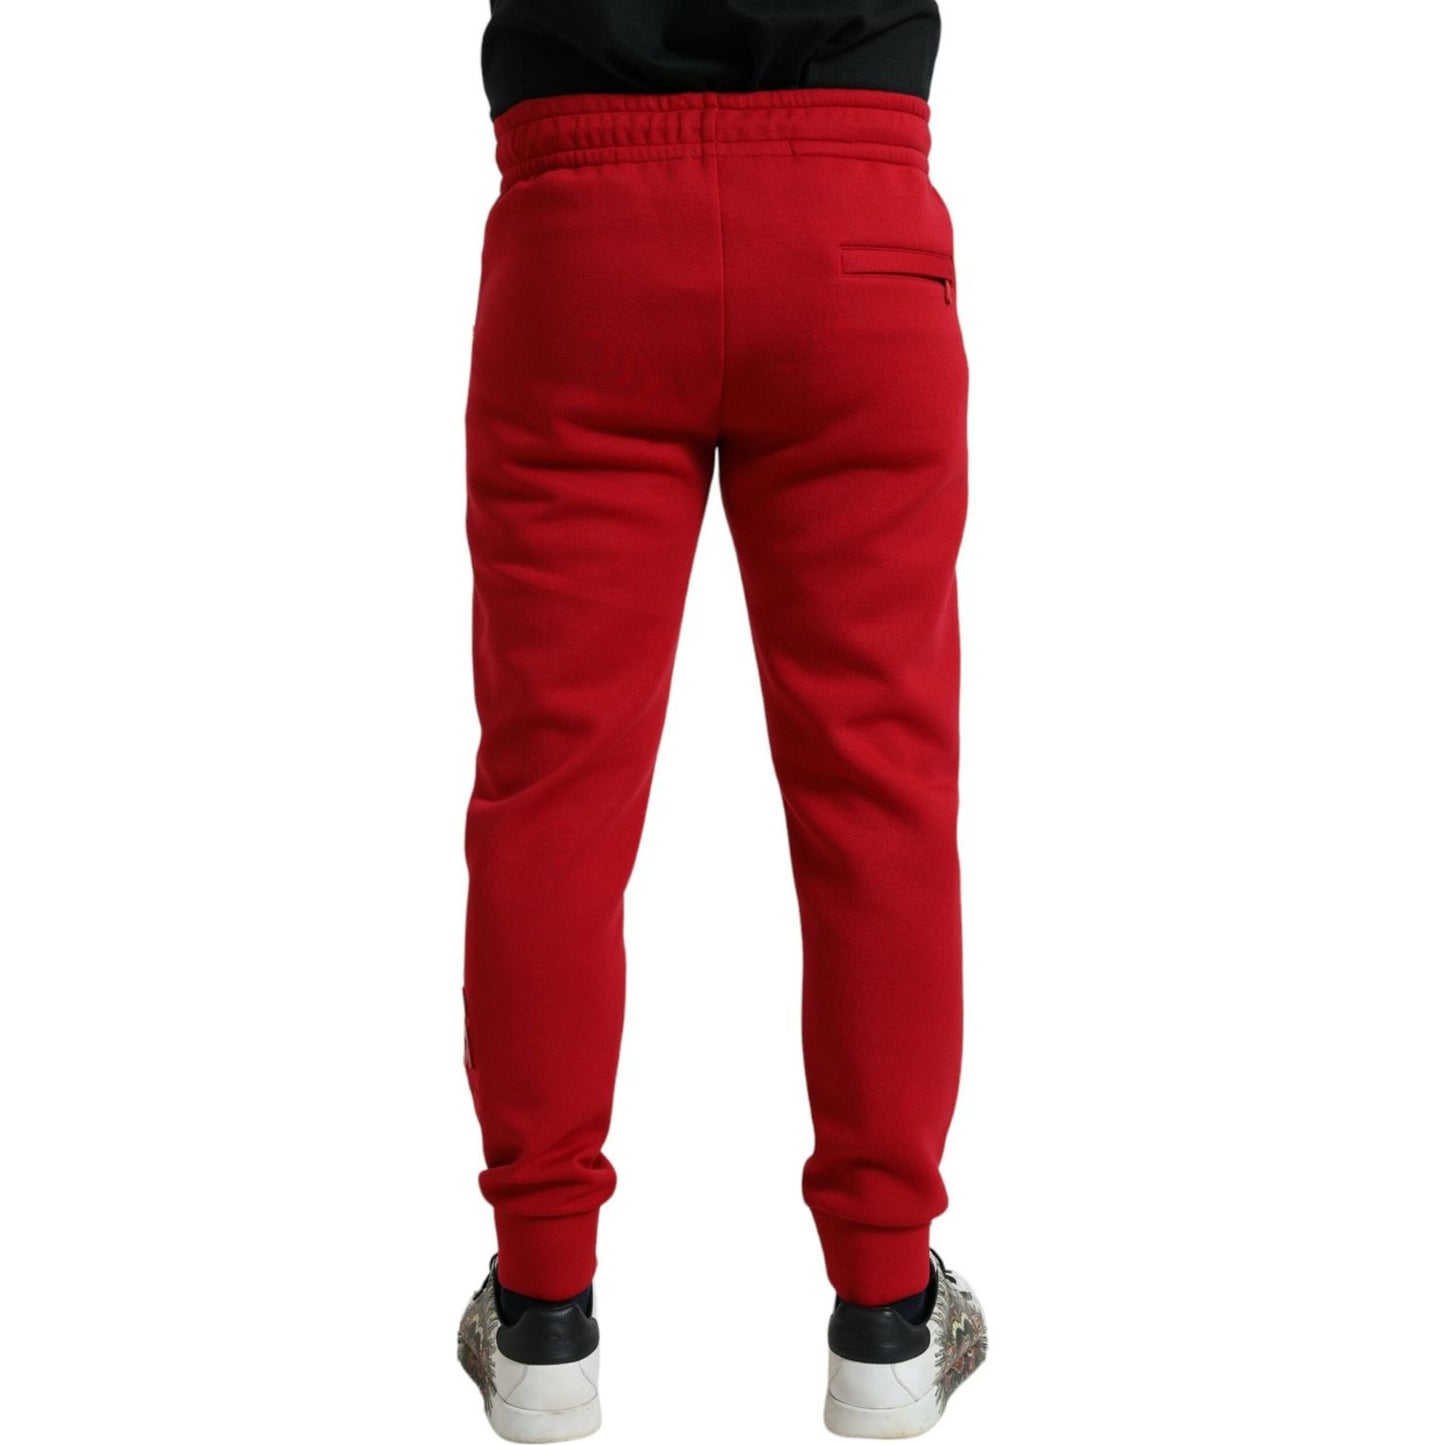 Dolce & Gabbana Sizzling Red Cotton Blend Jogger Pants red-cotton-blend-skinny-jogger-pants